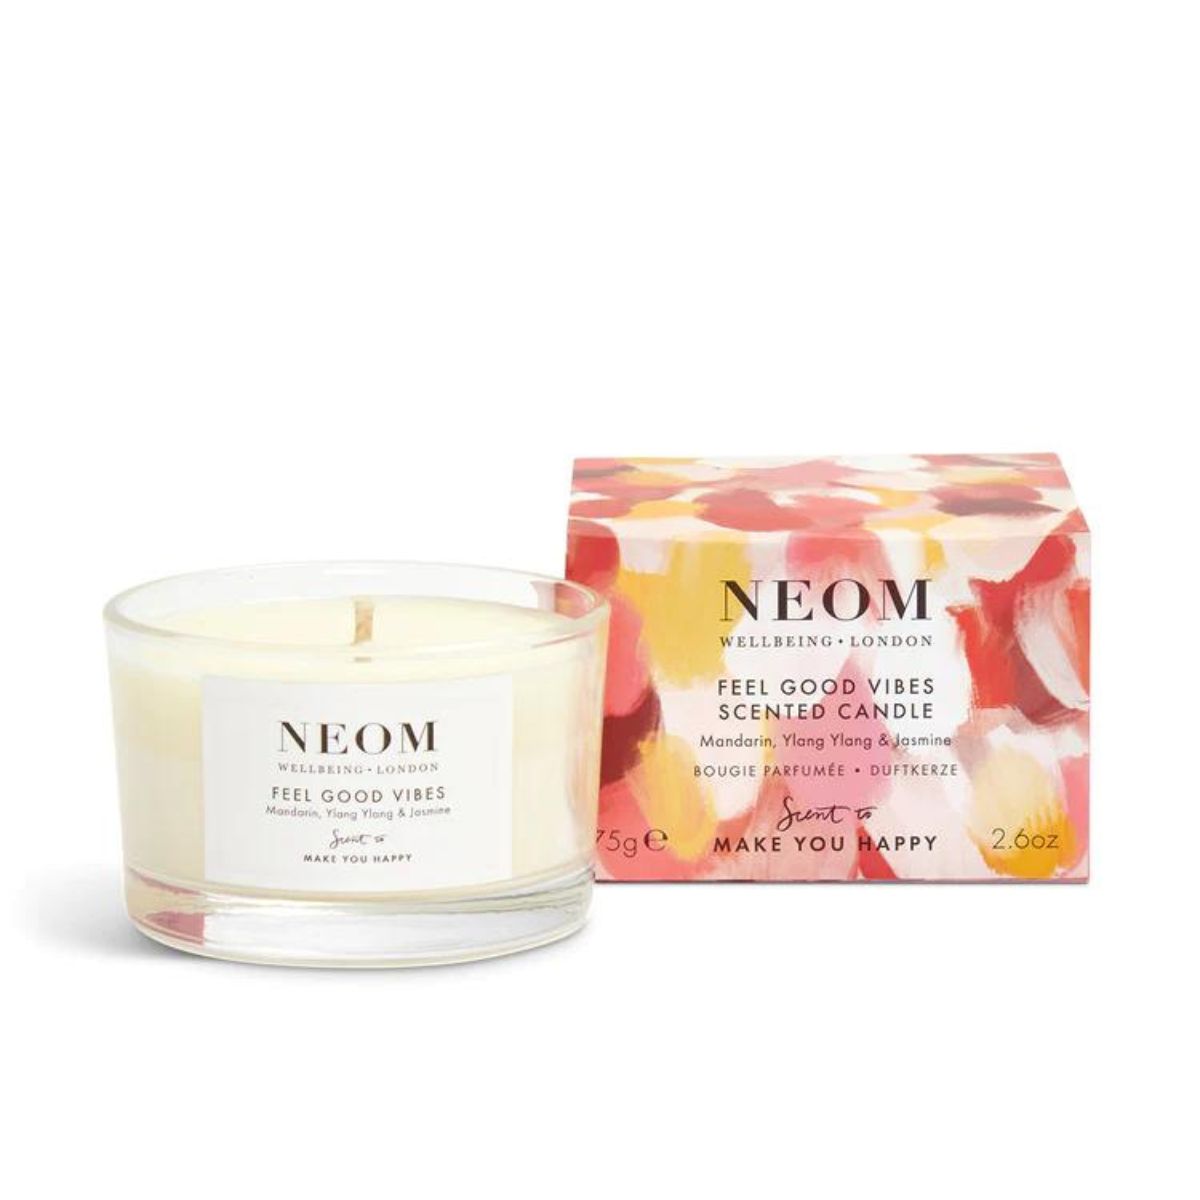 Neom Feel Good Vibes Travel Candle